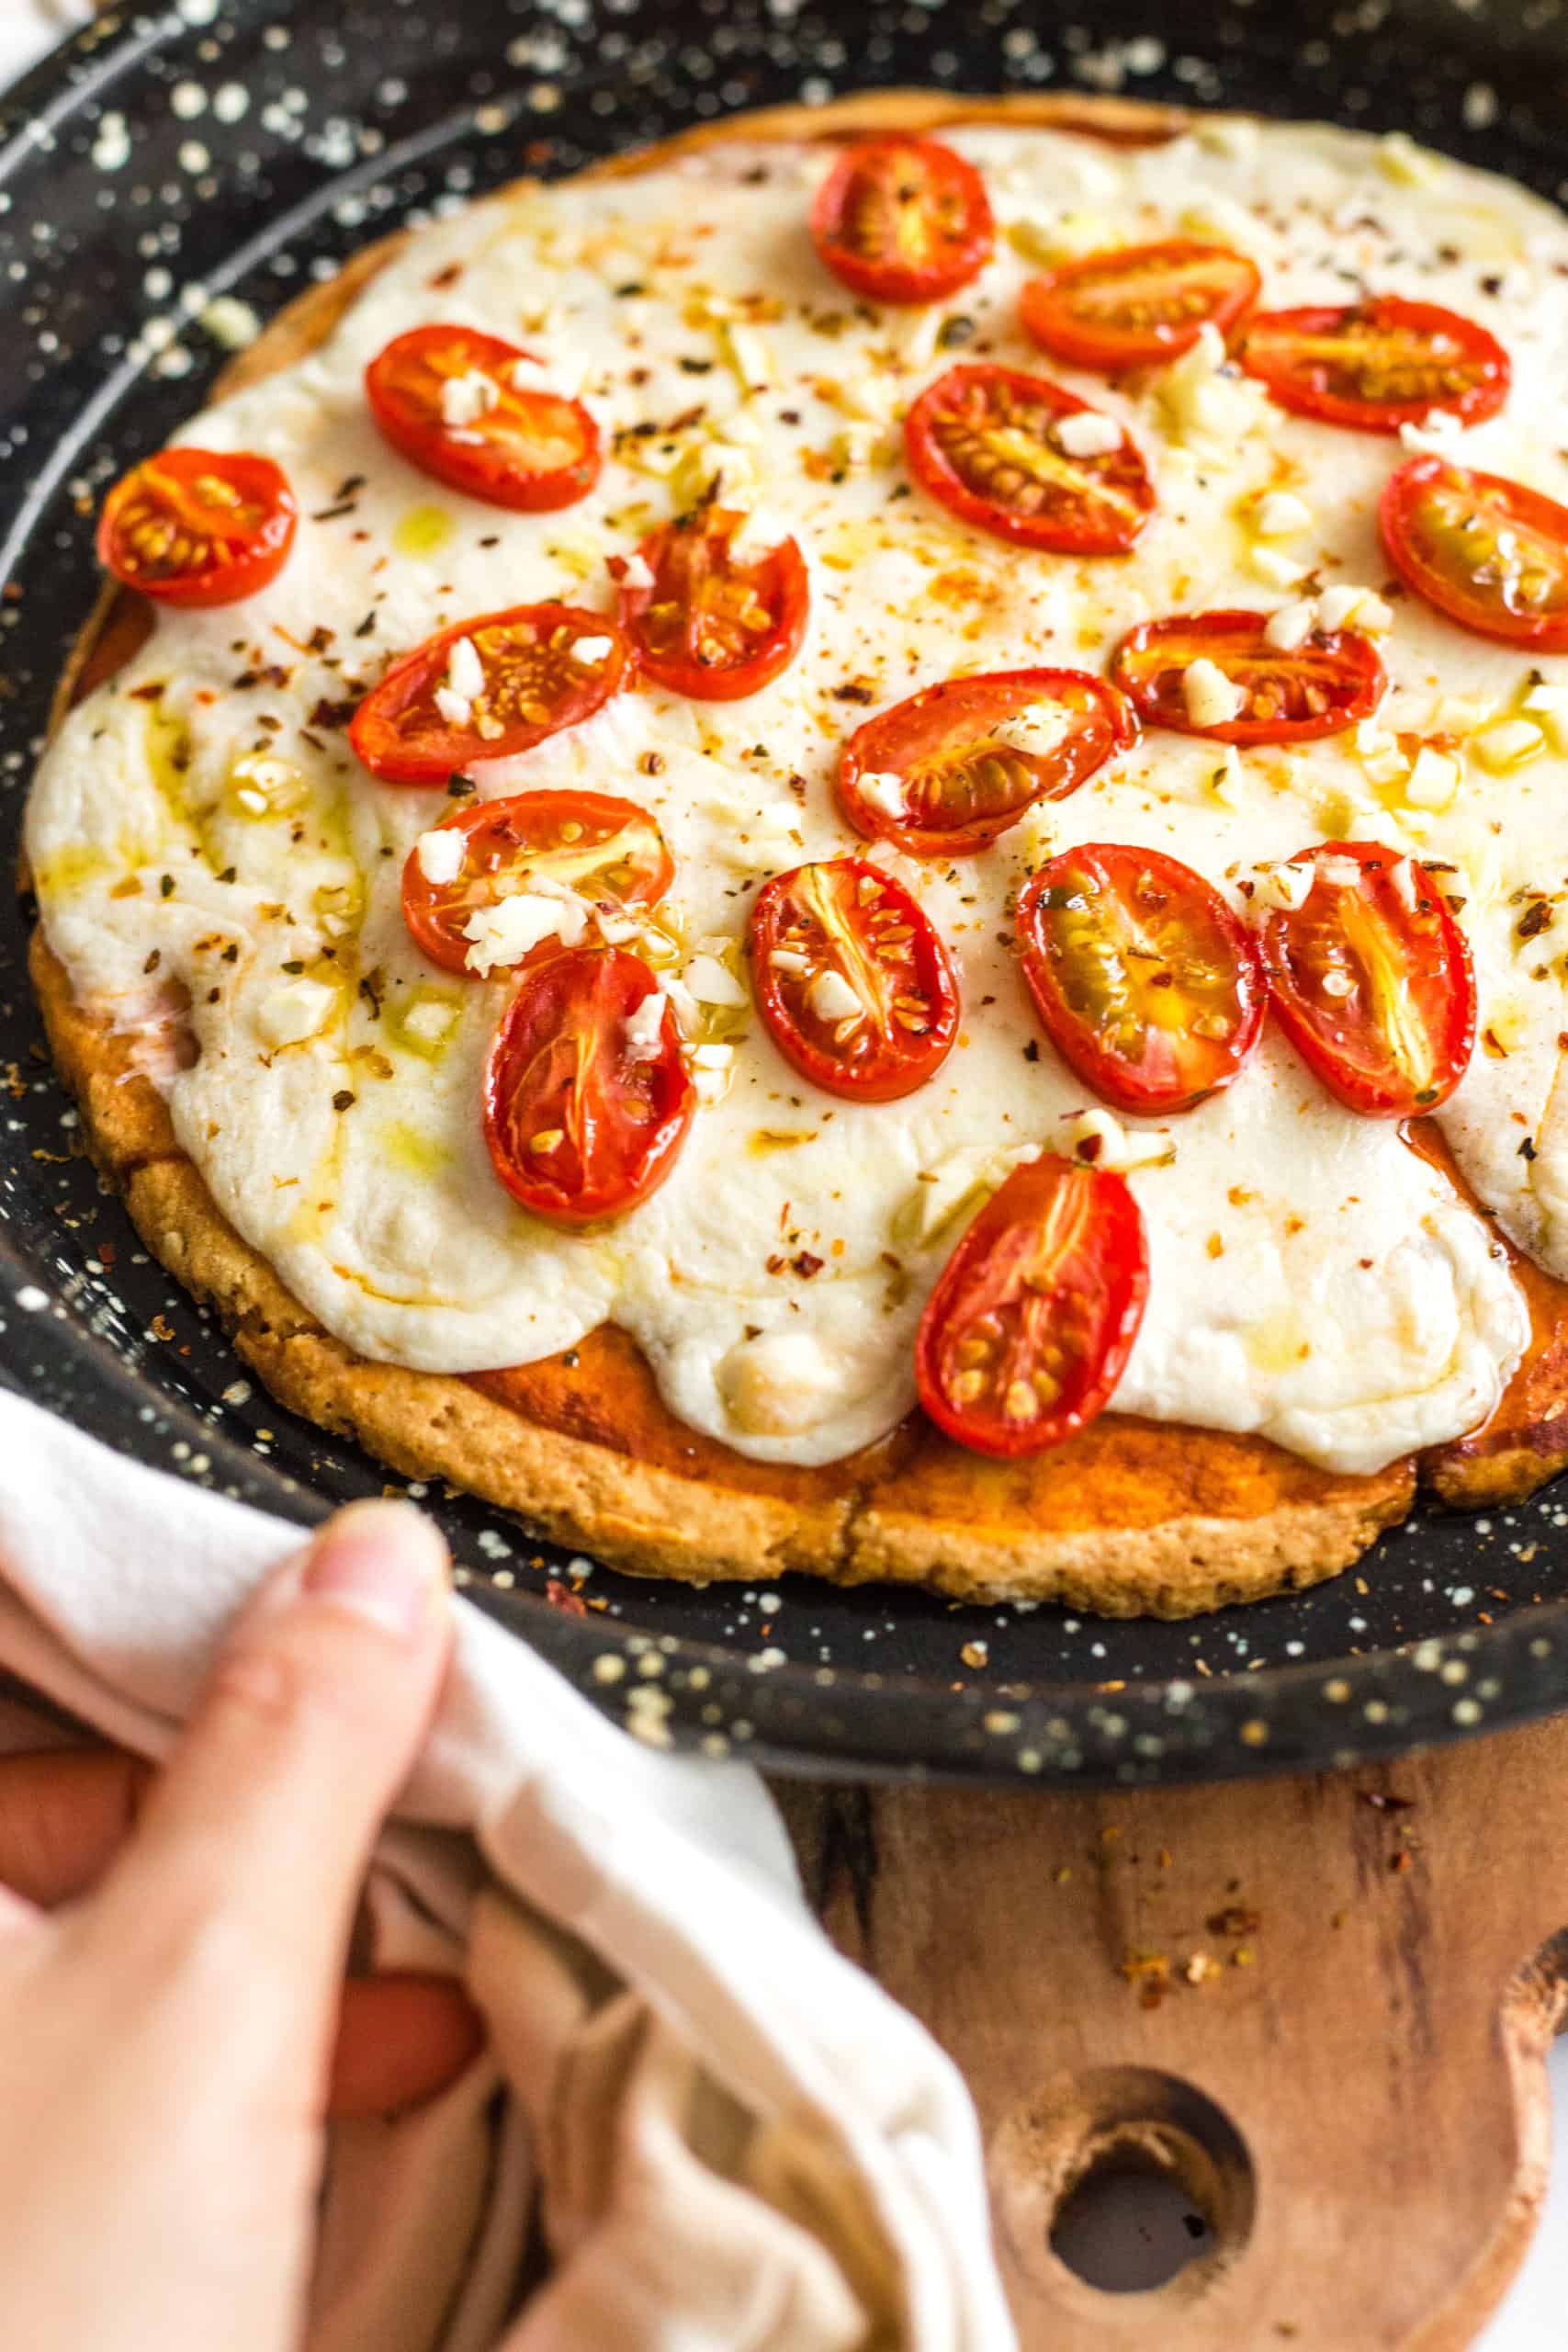 Gluten-free pizza topped with cheese and cherry tomatoes in a pizza pan